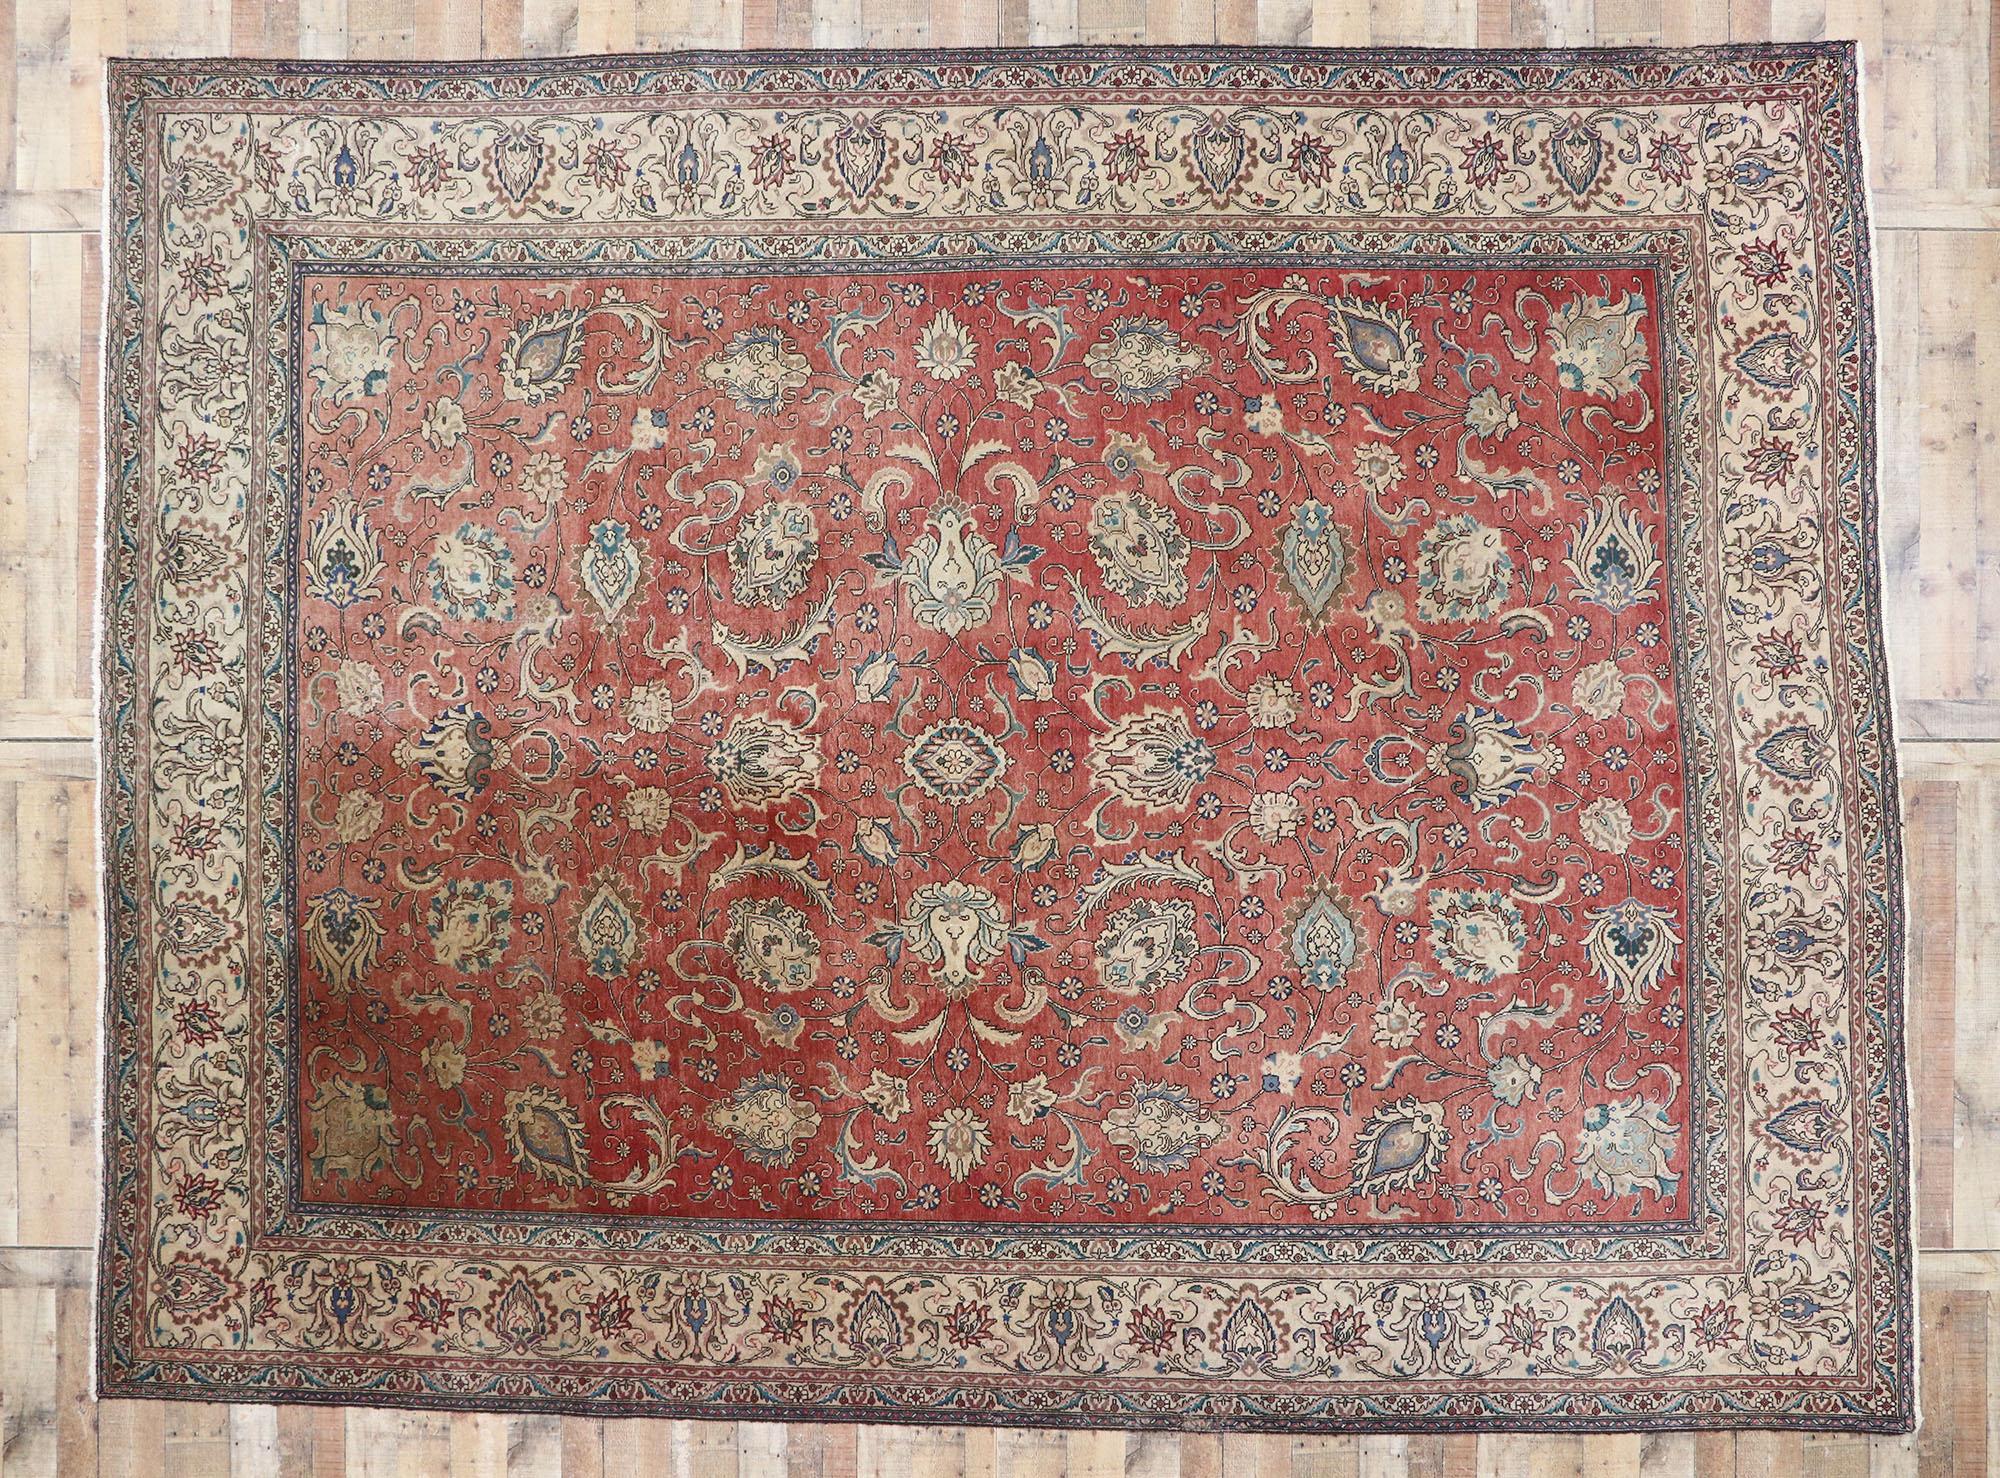 Antique Persian Tabriz Rug with Rustic Federal Style For Sale 2